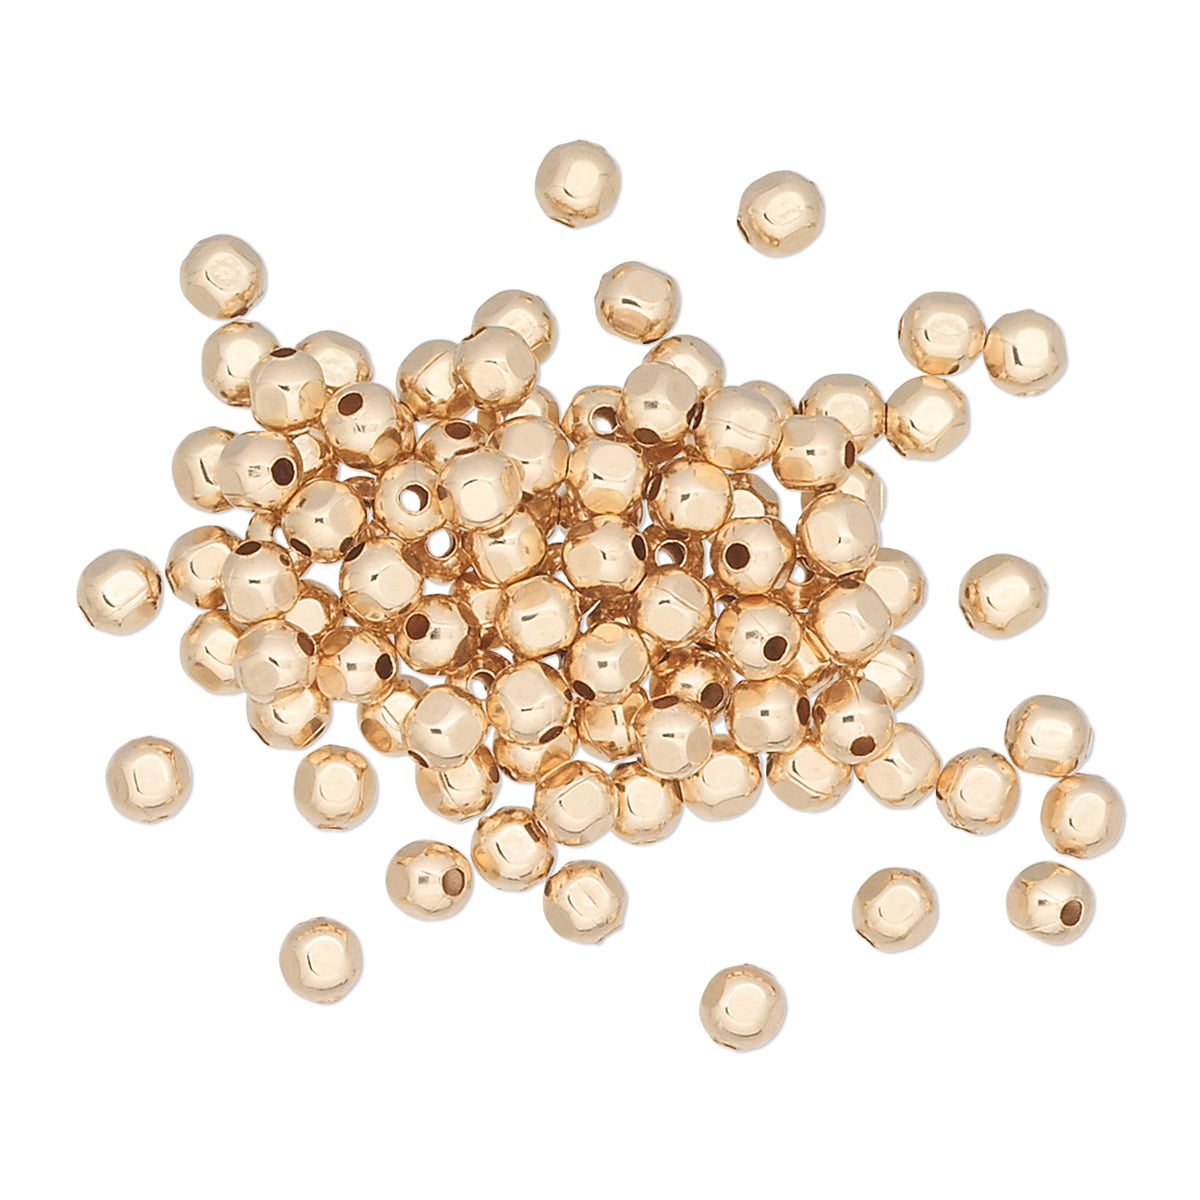 Gold-Filled 3mm Faceted Round Accent Beads for Beading or Jewelry Making 